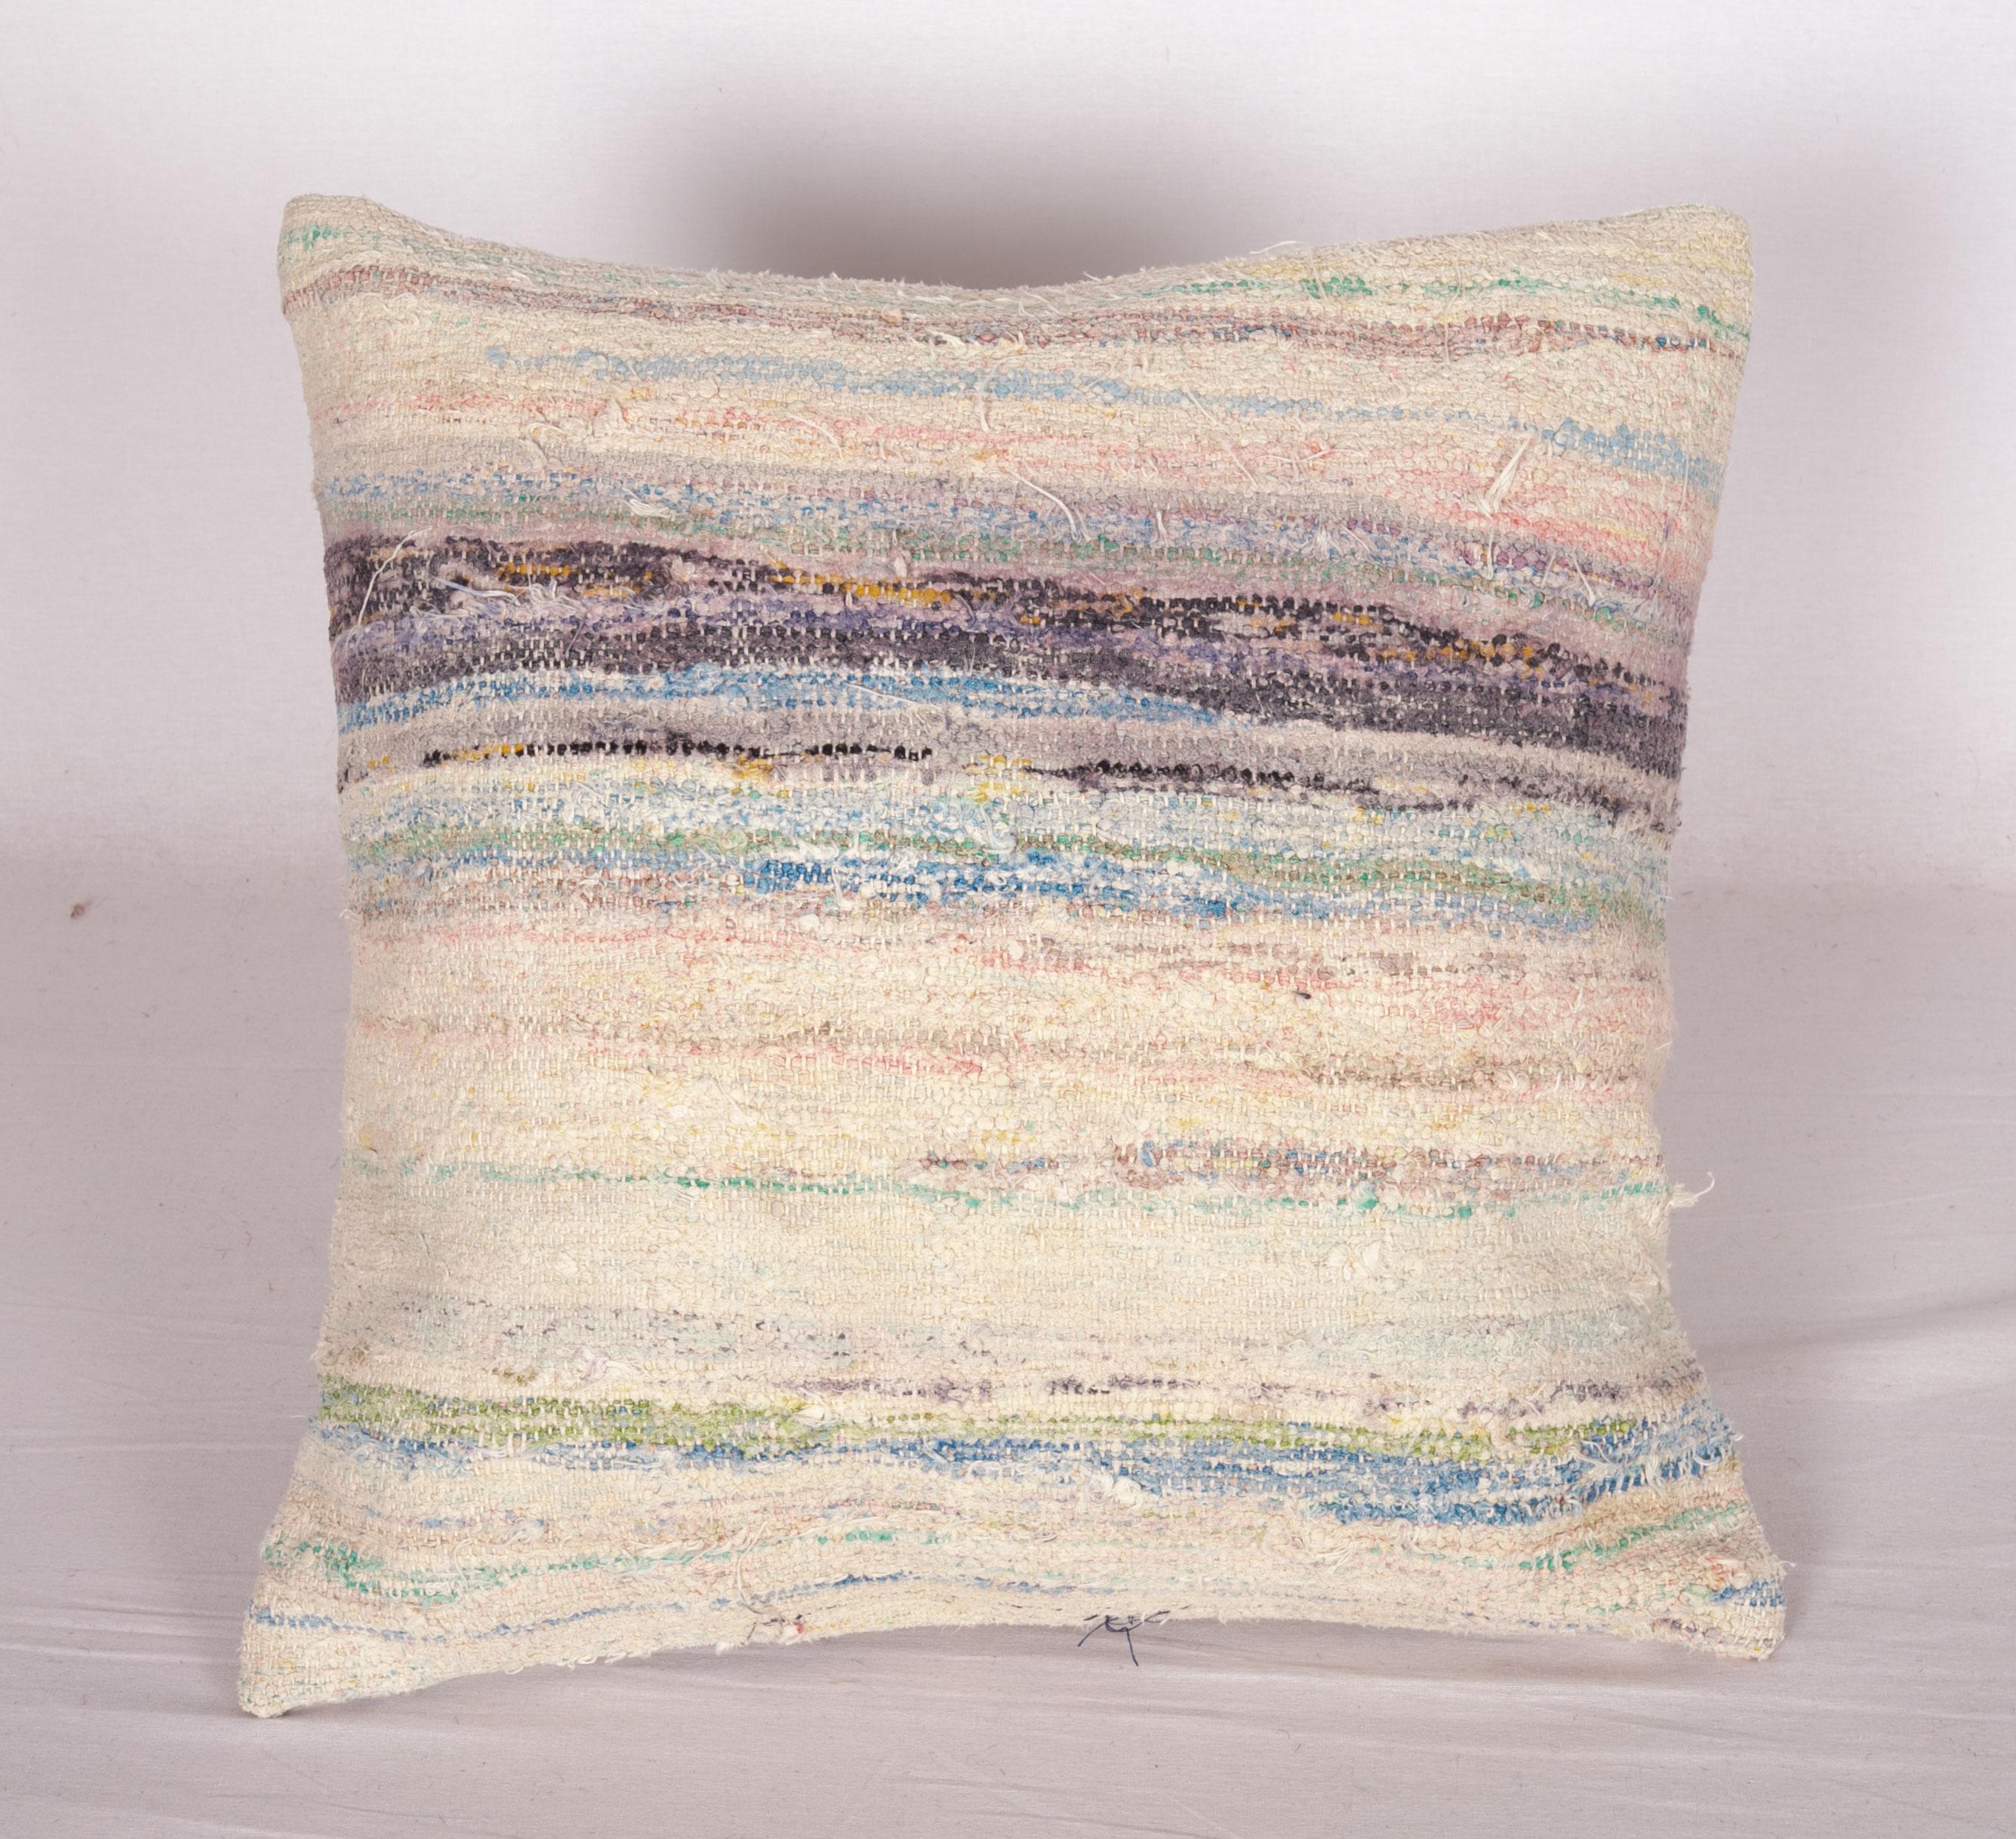 Hand-Woven Rustic Pillow Cases Made from an Anatolian Rag Rug, Mid-20th Century For Sale